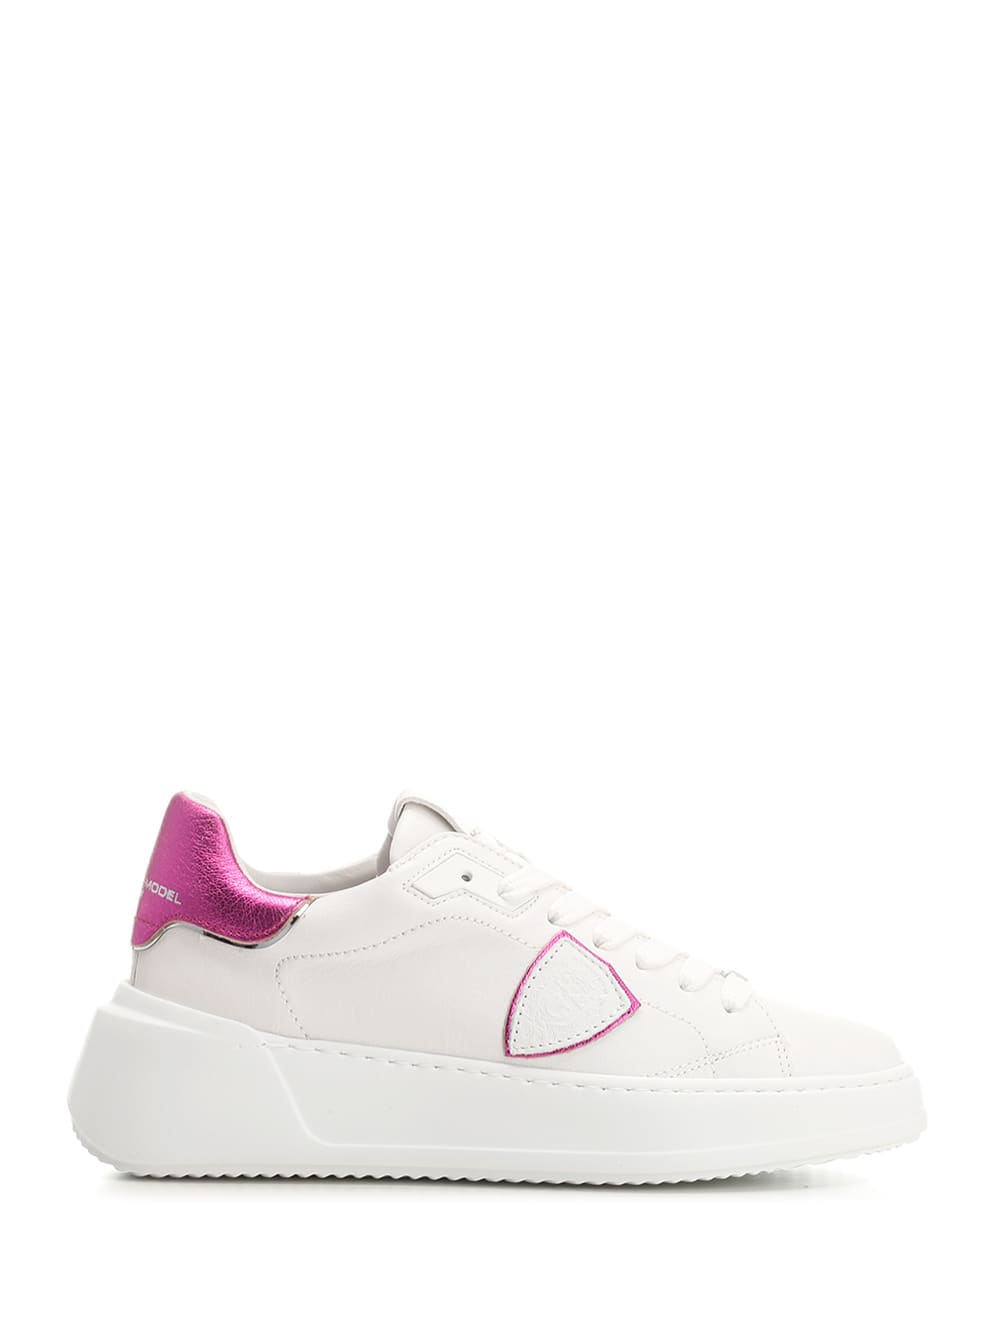 PHILIPPE MODEL TEMPLE SNEAKERS WITH FUCHSIA DETAILS